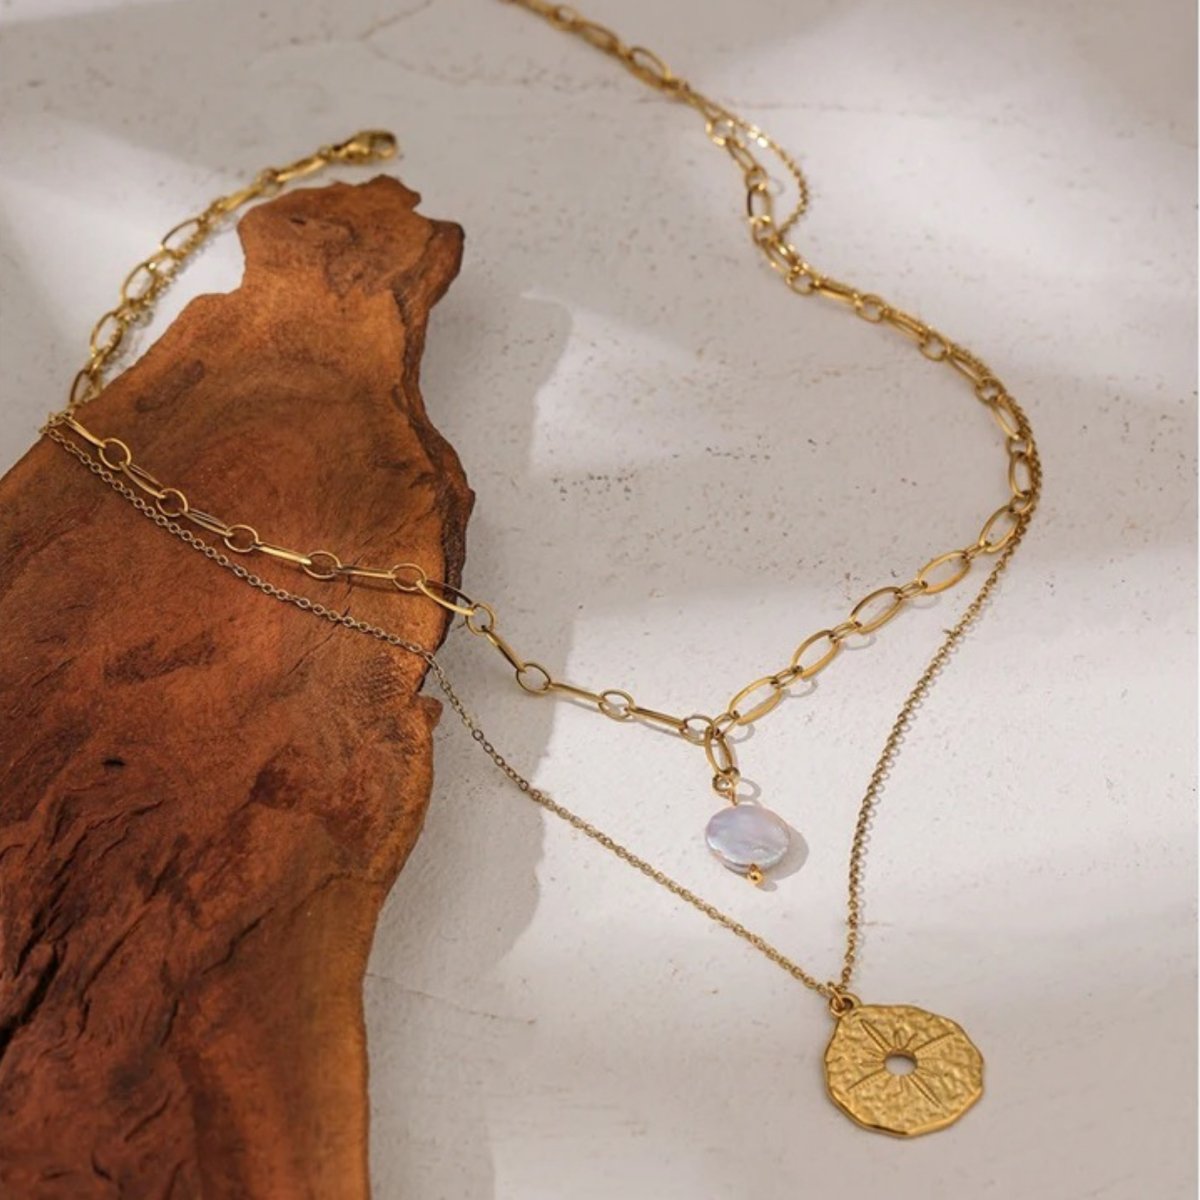 The North Star Layered Necklace - C.J.ROCKER